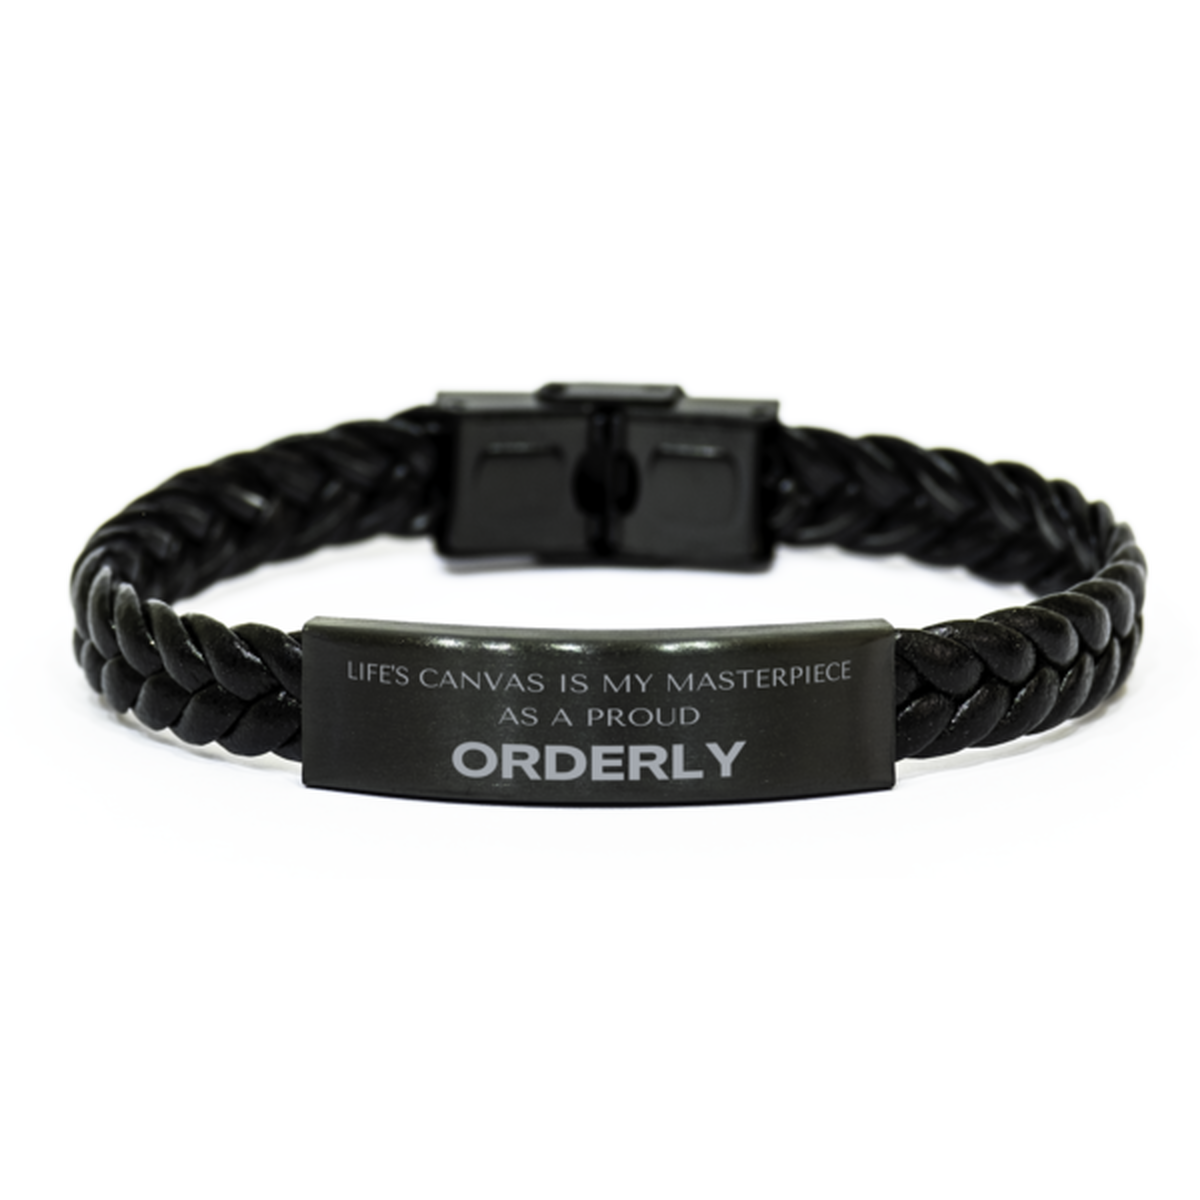 Proud Orderly Gifts, Life's canvas is my masterpiece, Epic Birthday Christmas Unique Braided Leather Bracelet For Orderly, Coworkers, Men, Women, Friends